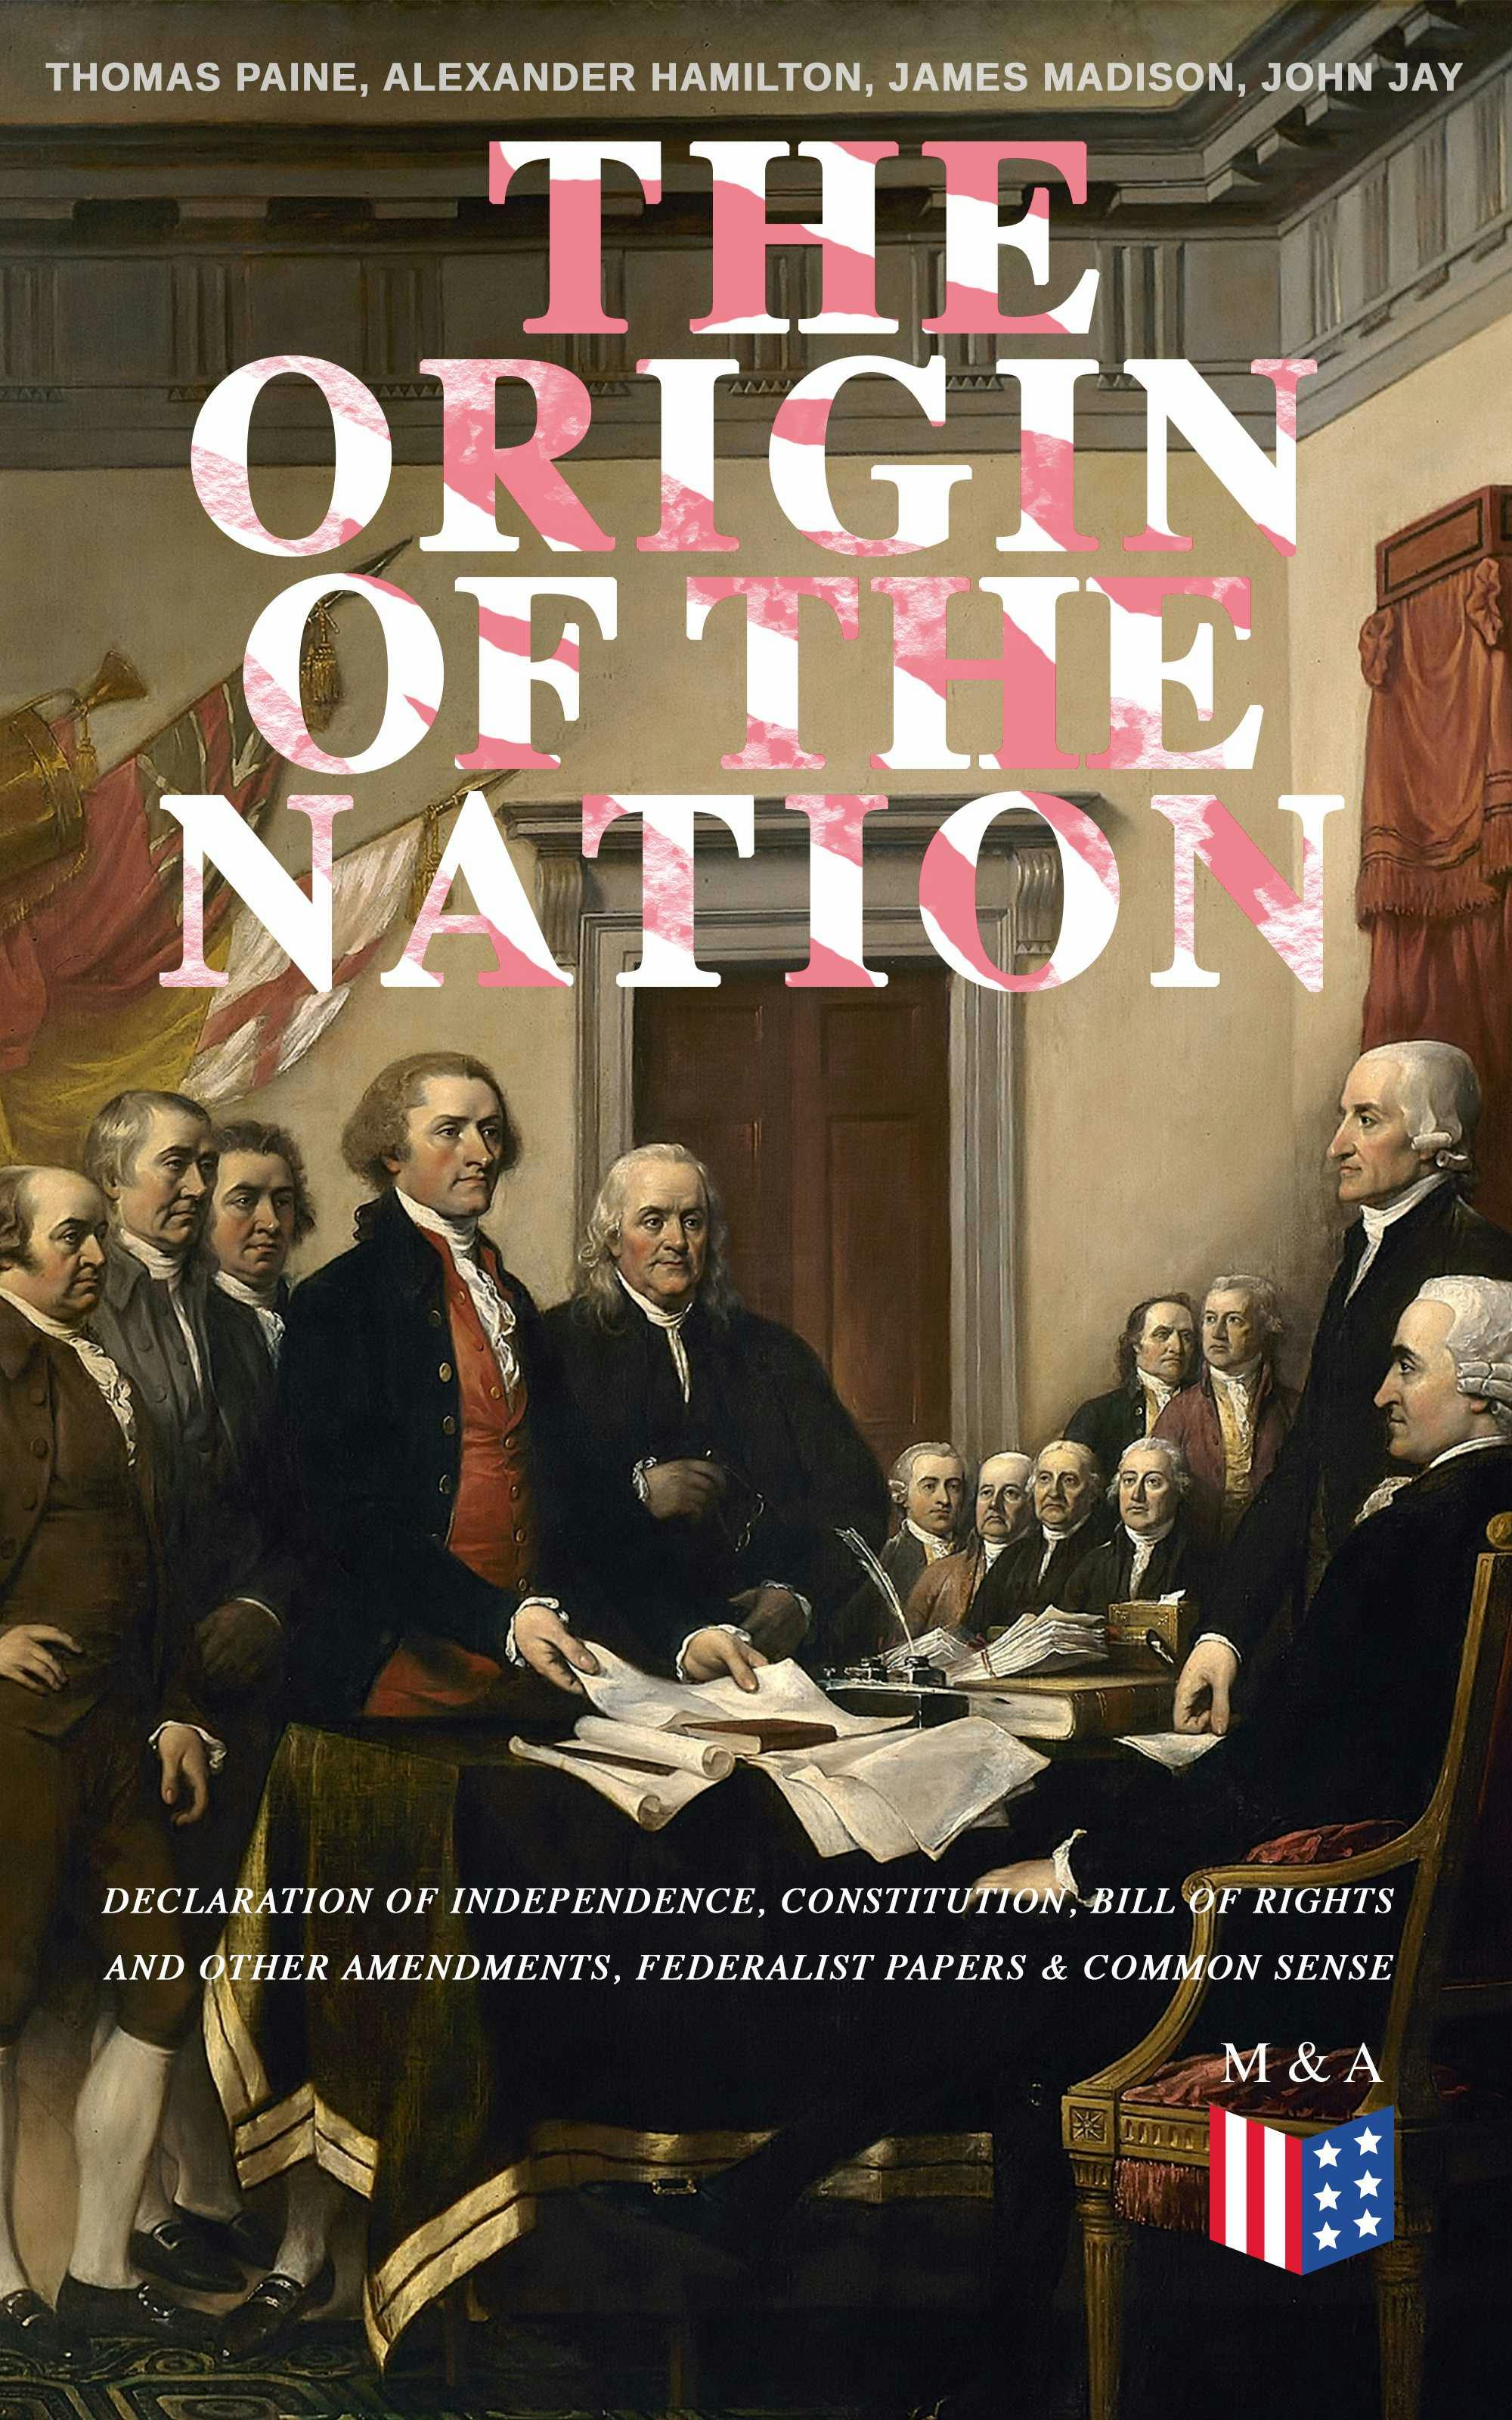 The Origin of the Nation: Declaration of Independence, Constitution, Bill of Rights and Other Amendments, Federalist Papers & Common Sense: Creating America - Landmark Documents that Shaped a New Nation - James Madison, Alexander Hamilton, John Jay, Thomas Paine